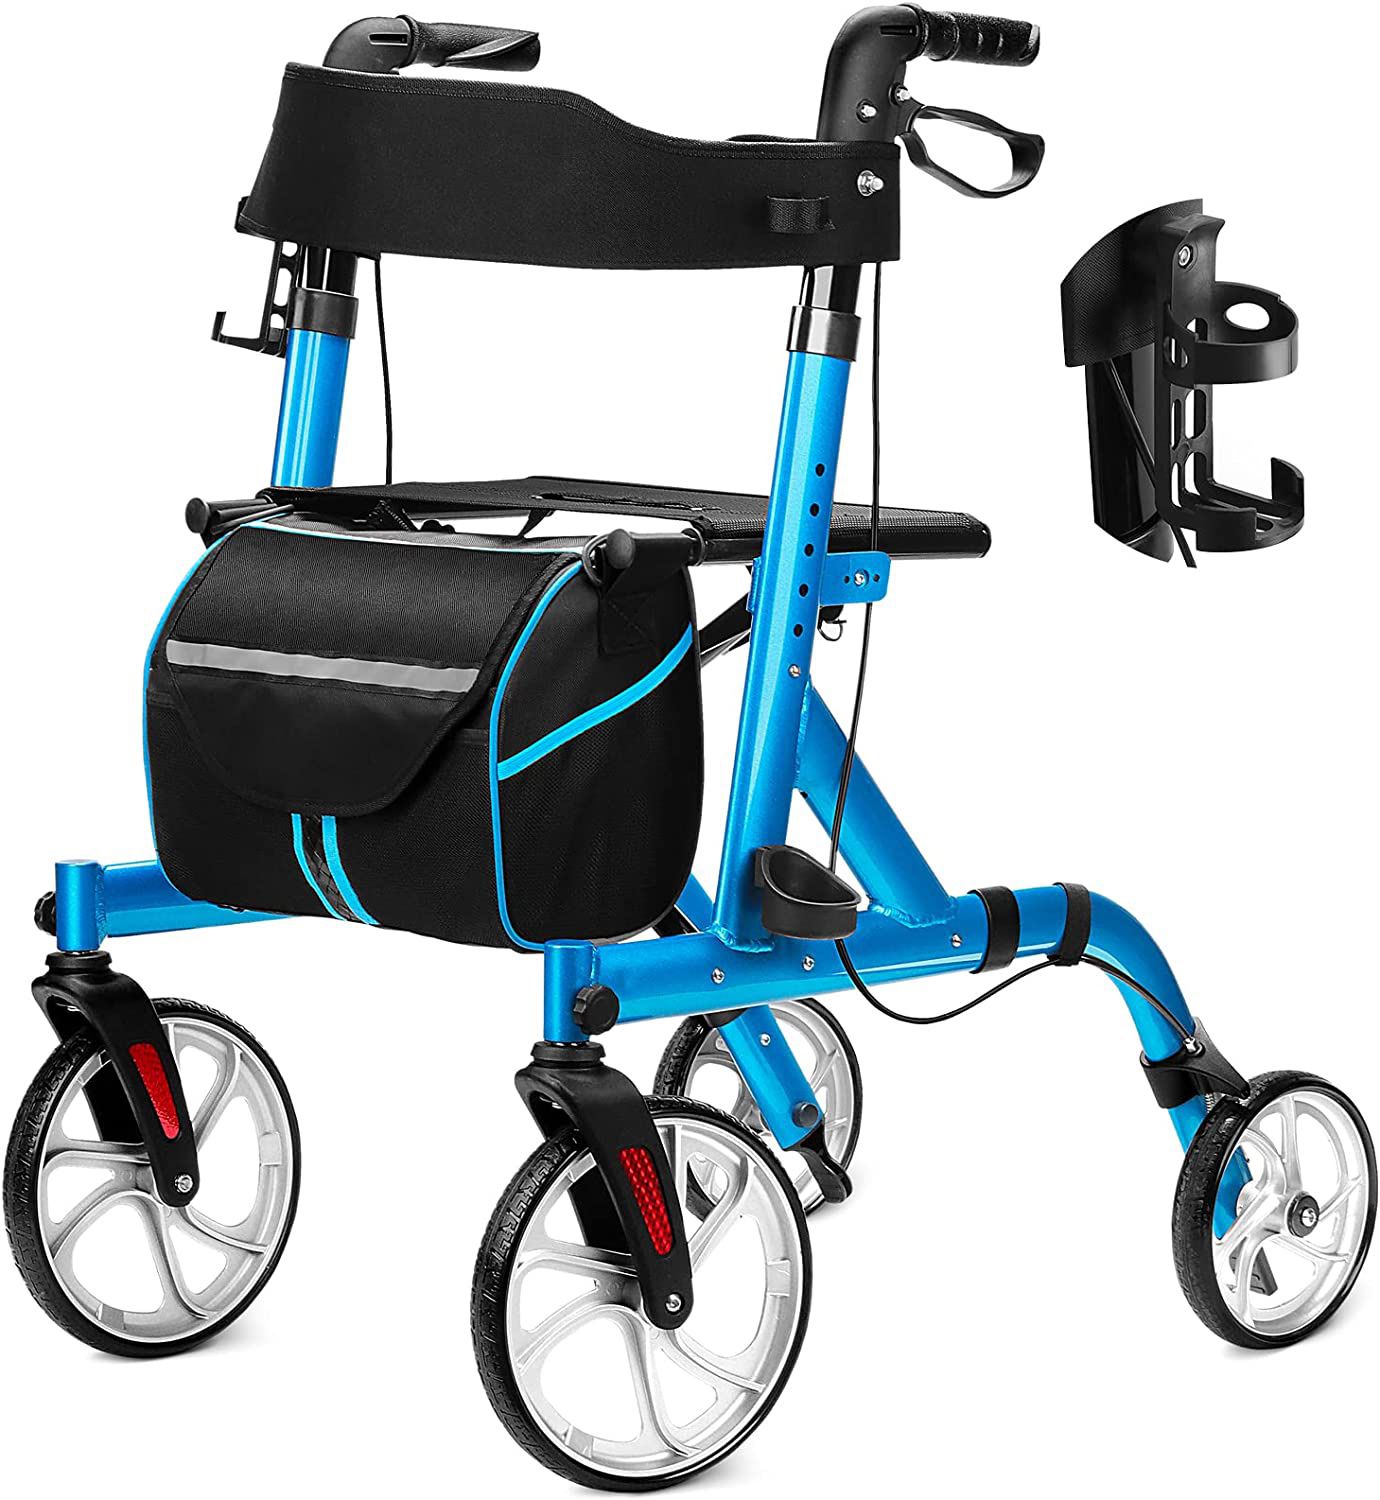 SUSATI Rollator Walker With Extra Wide Seat And 10” Large Wheels With Cup Holder Padded Back Rest 